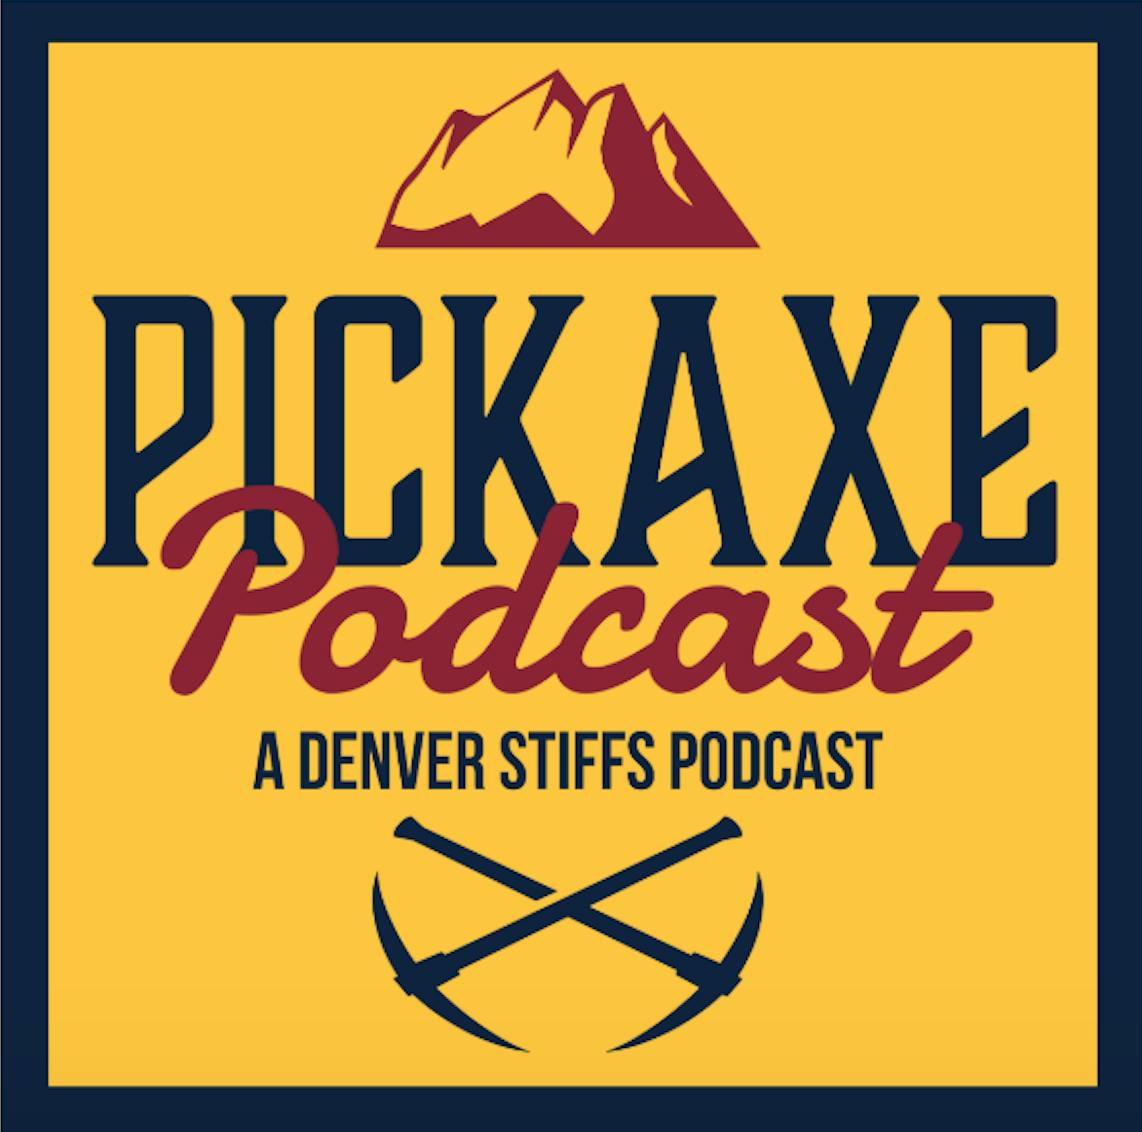 Pickaxe Podcast: The Denver Nuggets are off to a rocky start to the 2020-21 season